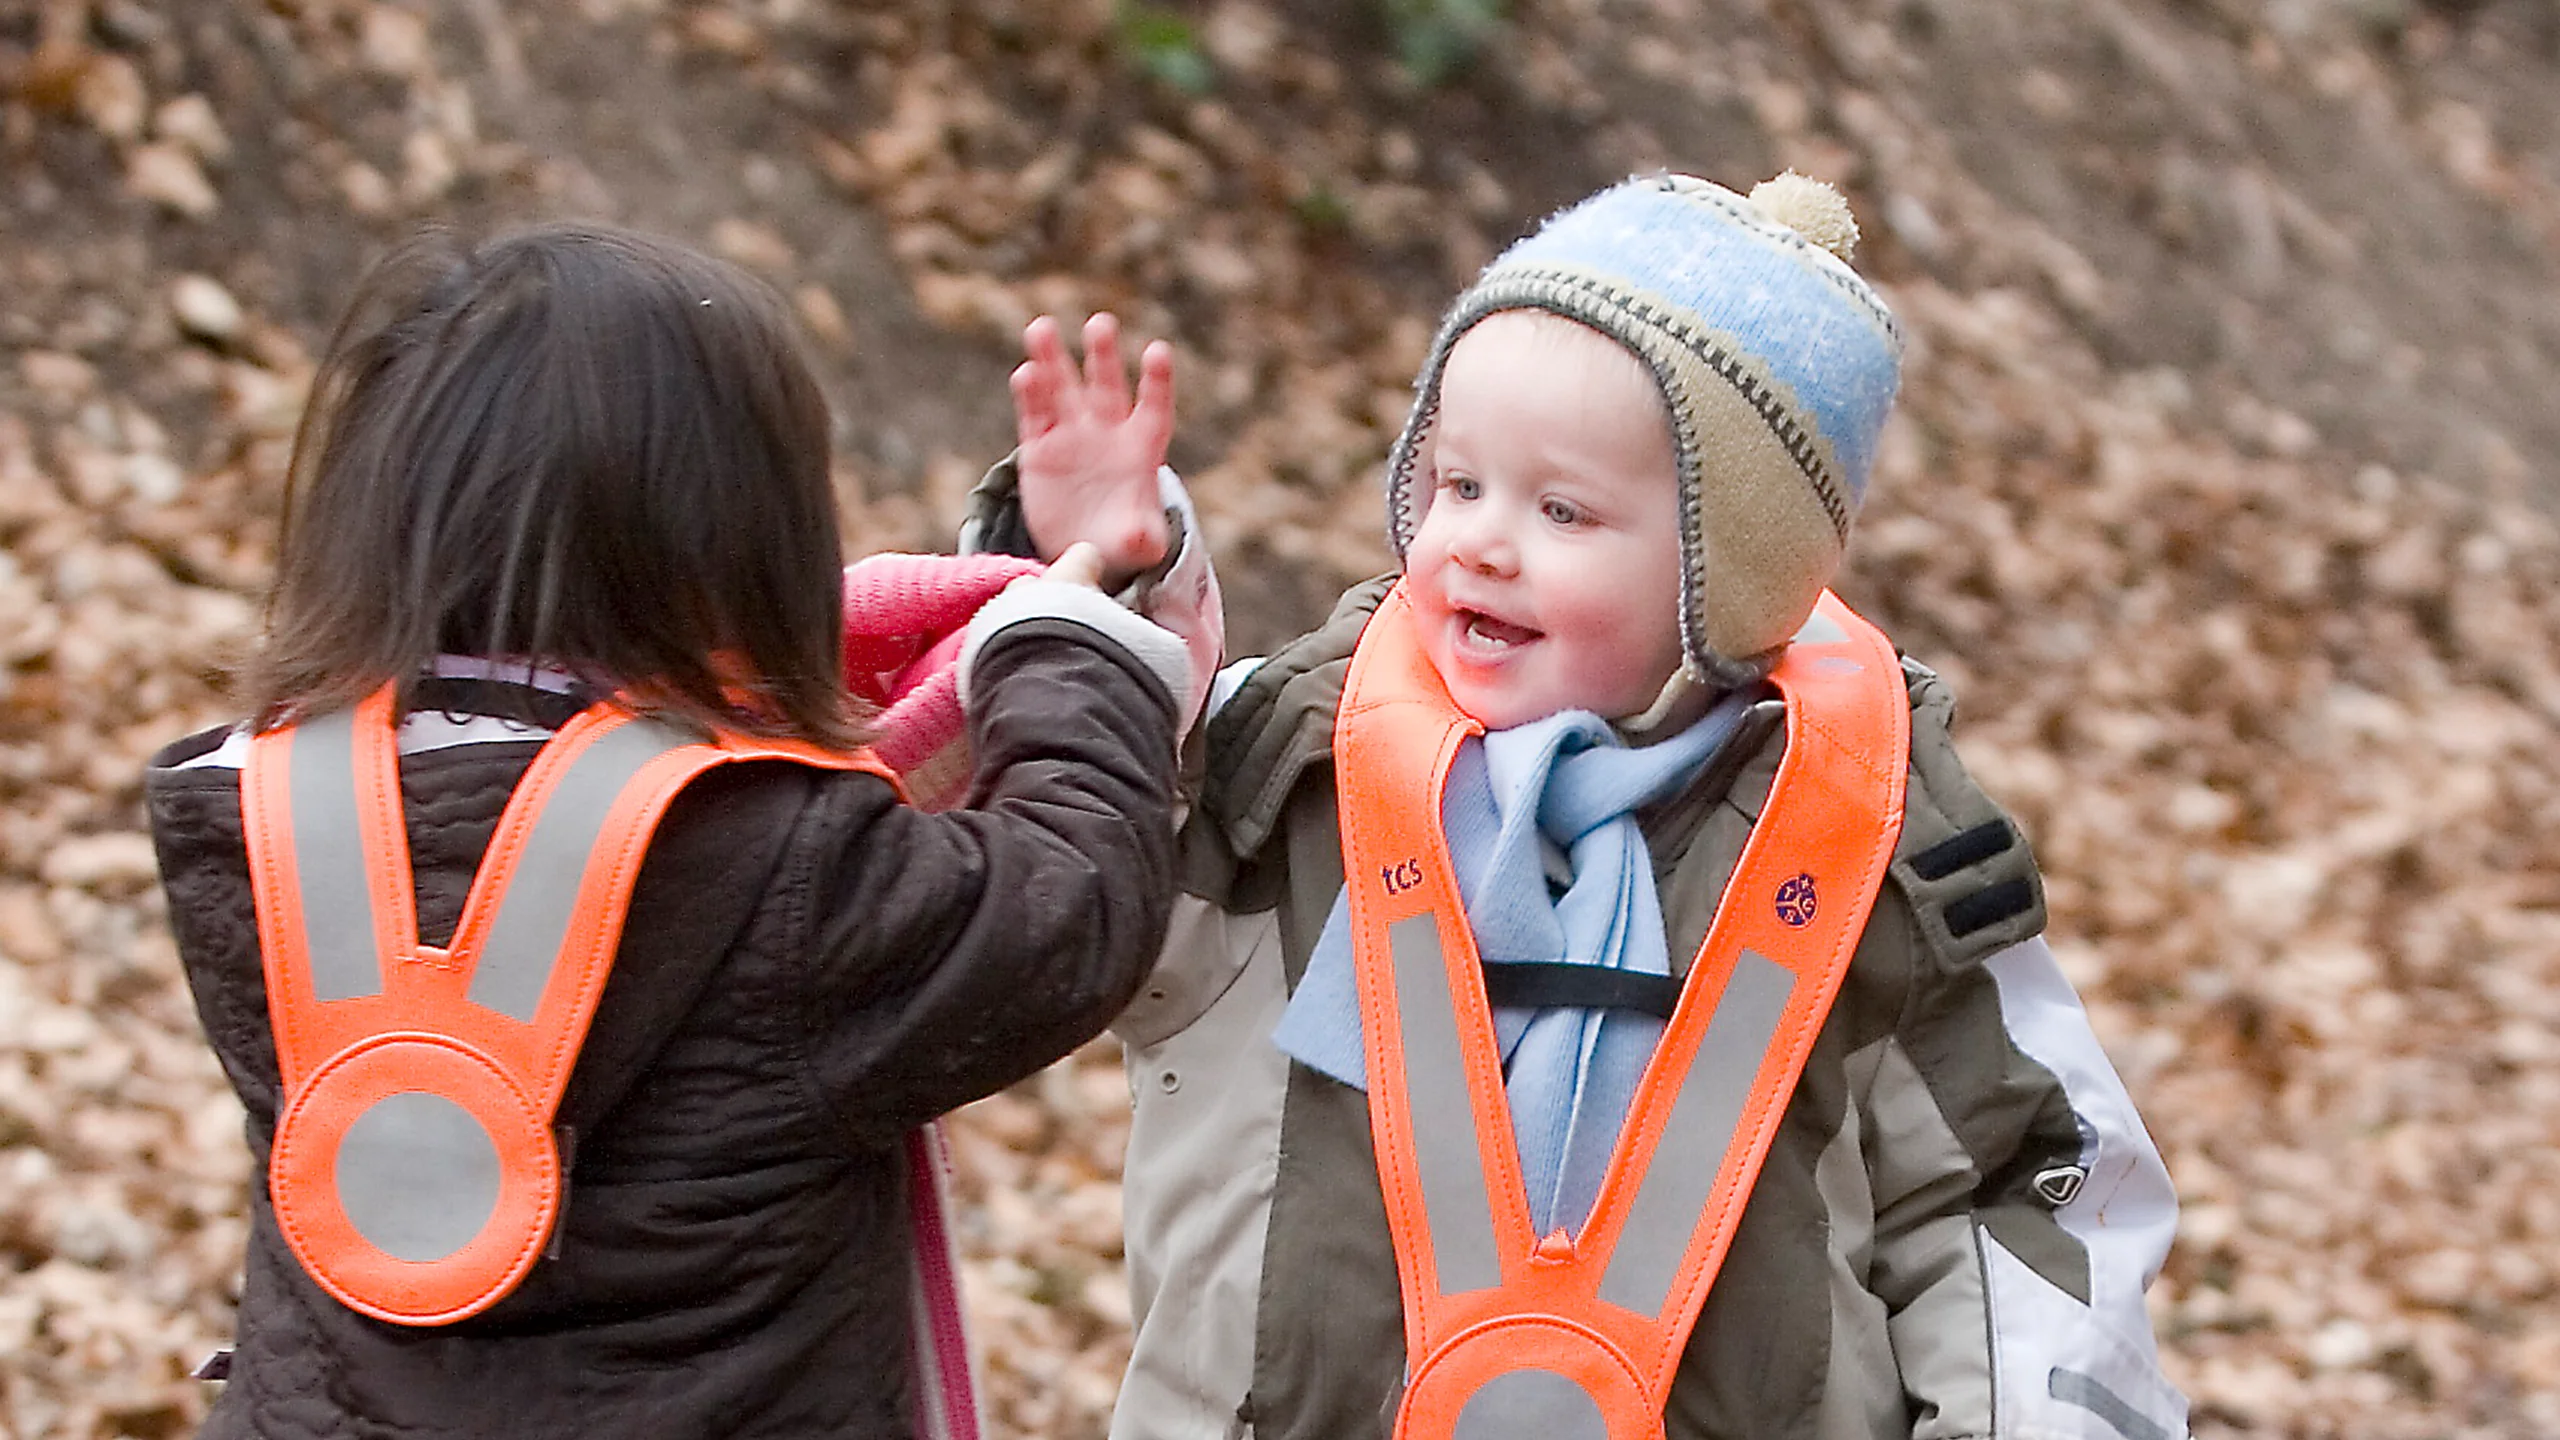 Toddlers experience nature and the outdoors playfully.